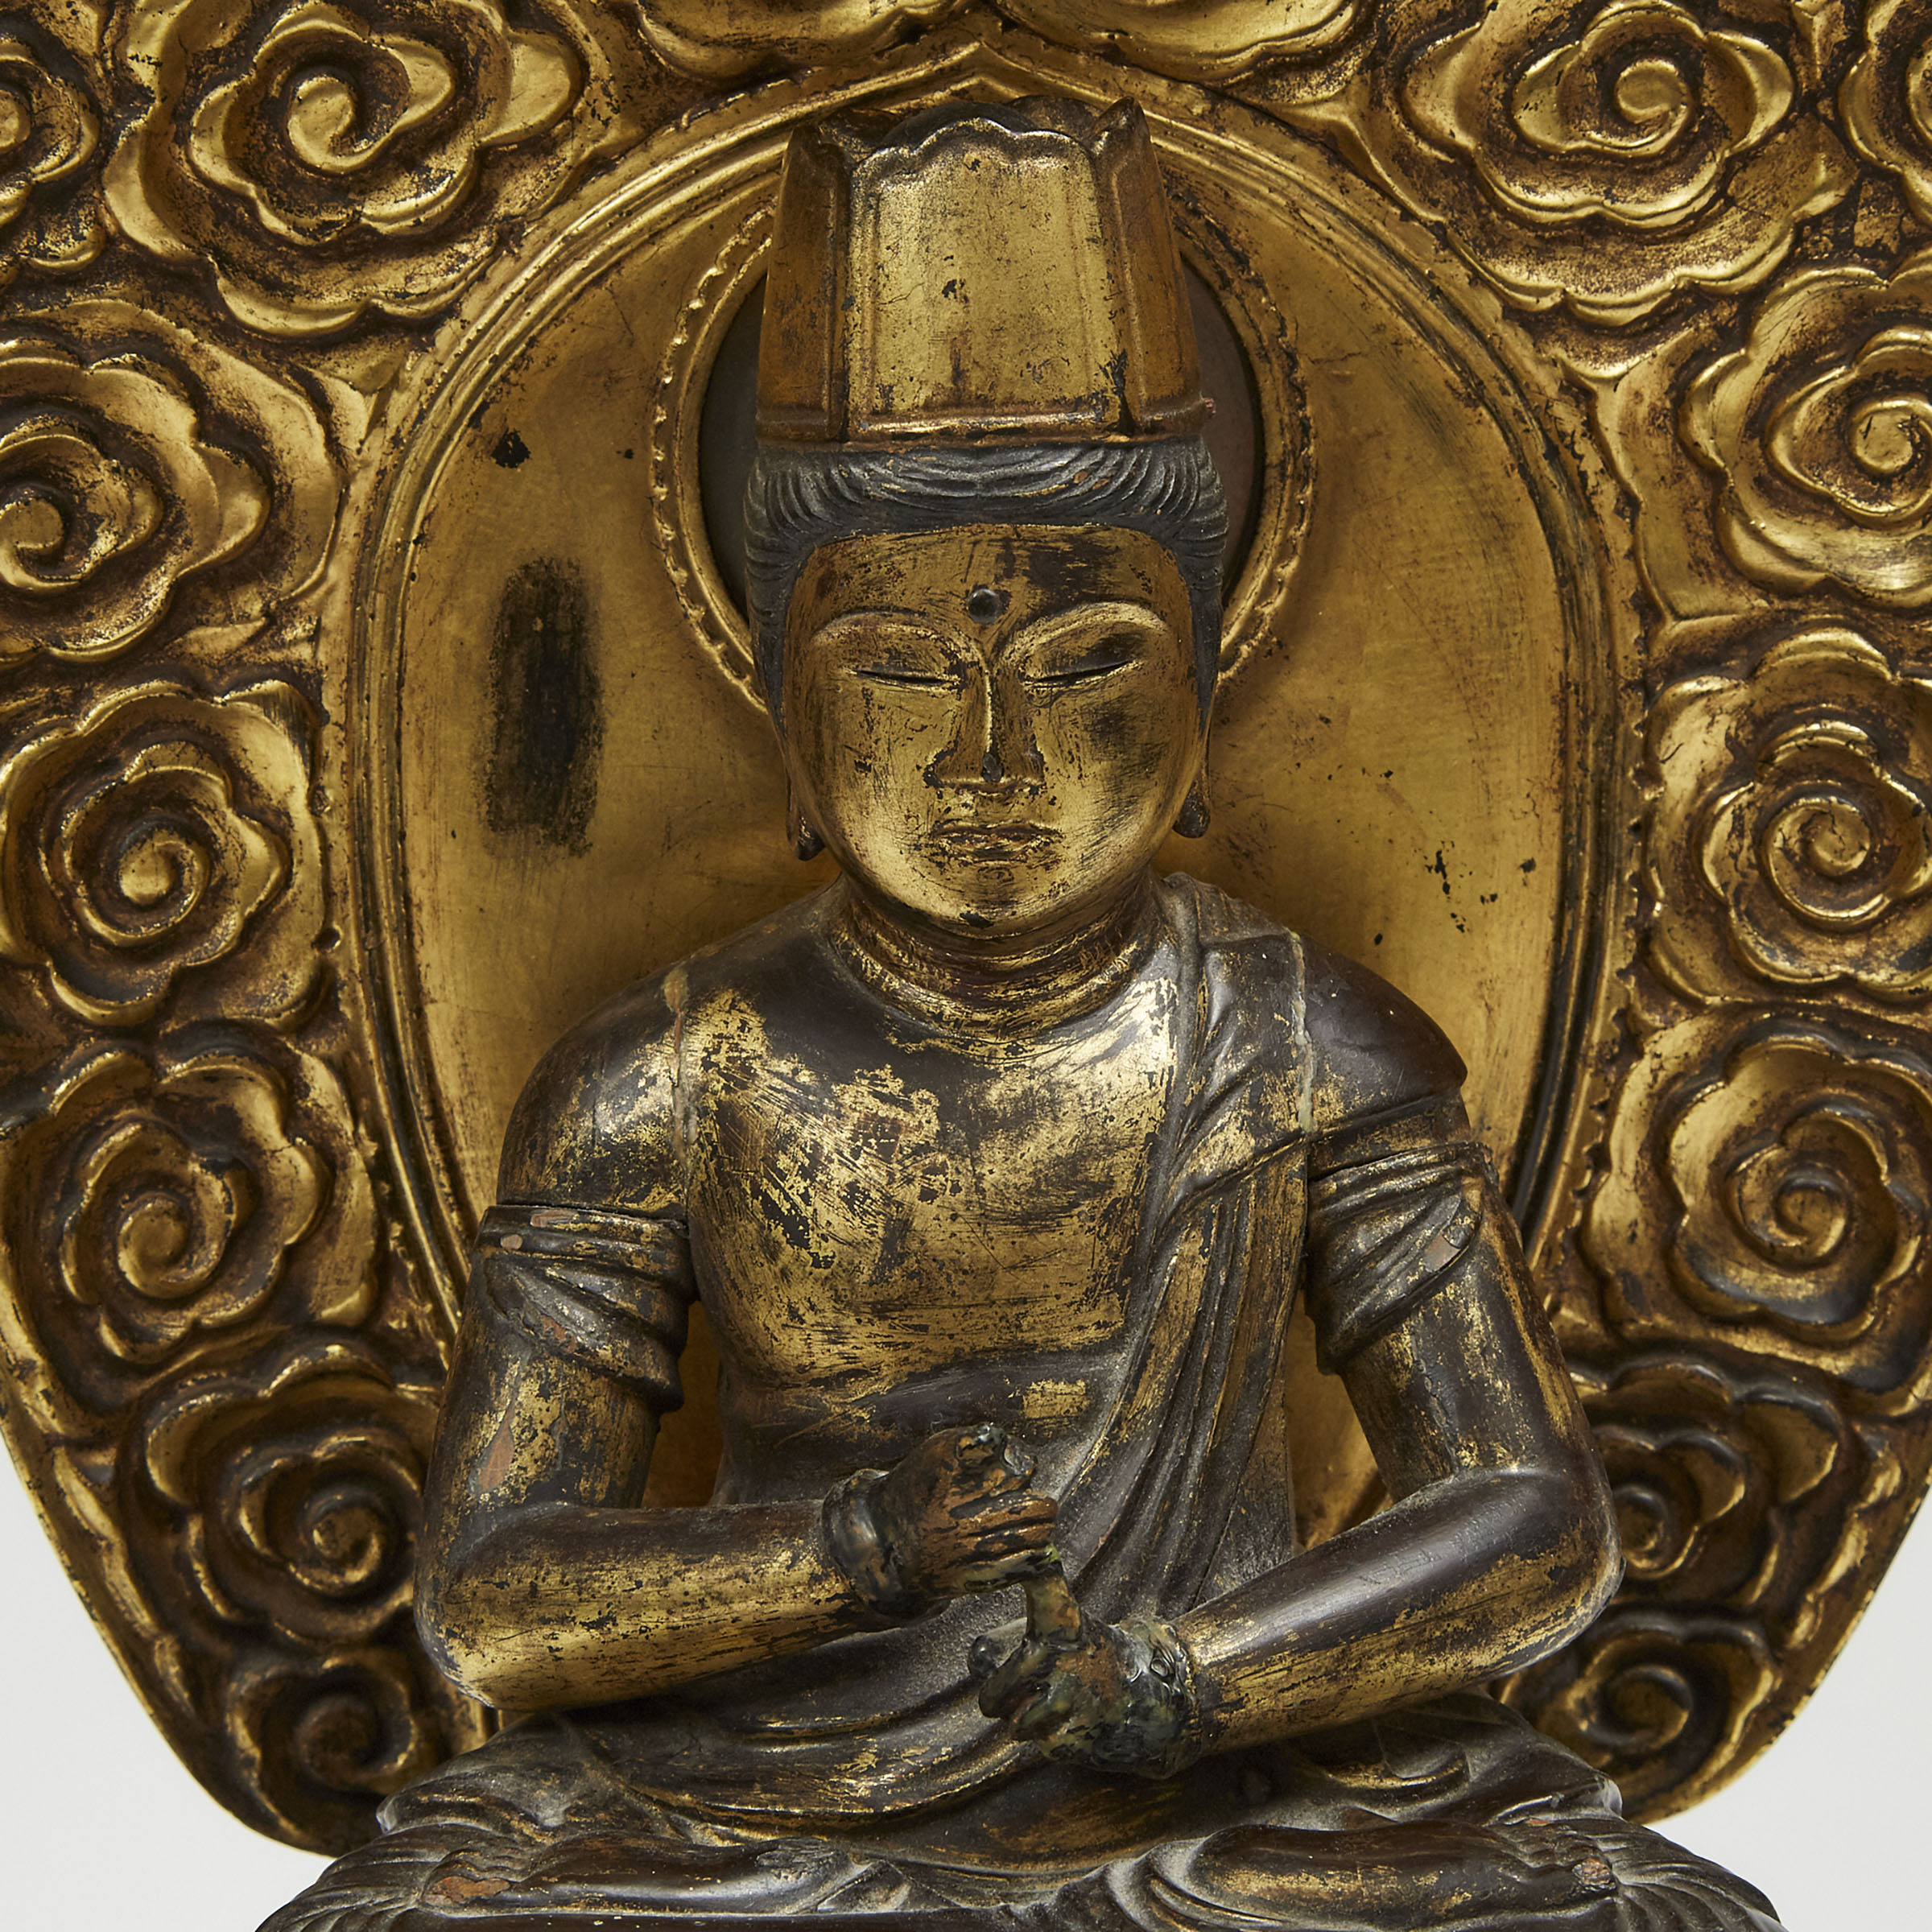 A Japanese Gilt Wood Seated Bosatsu, together with a Wood Carving of a Monk, 18th/19th Century